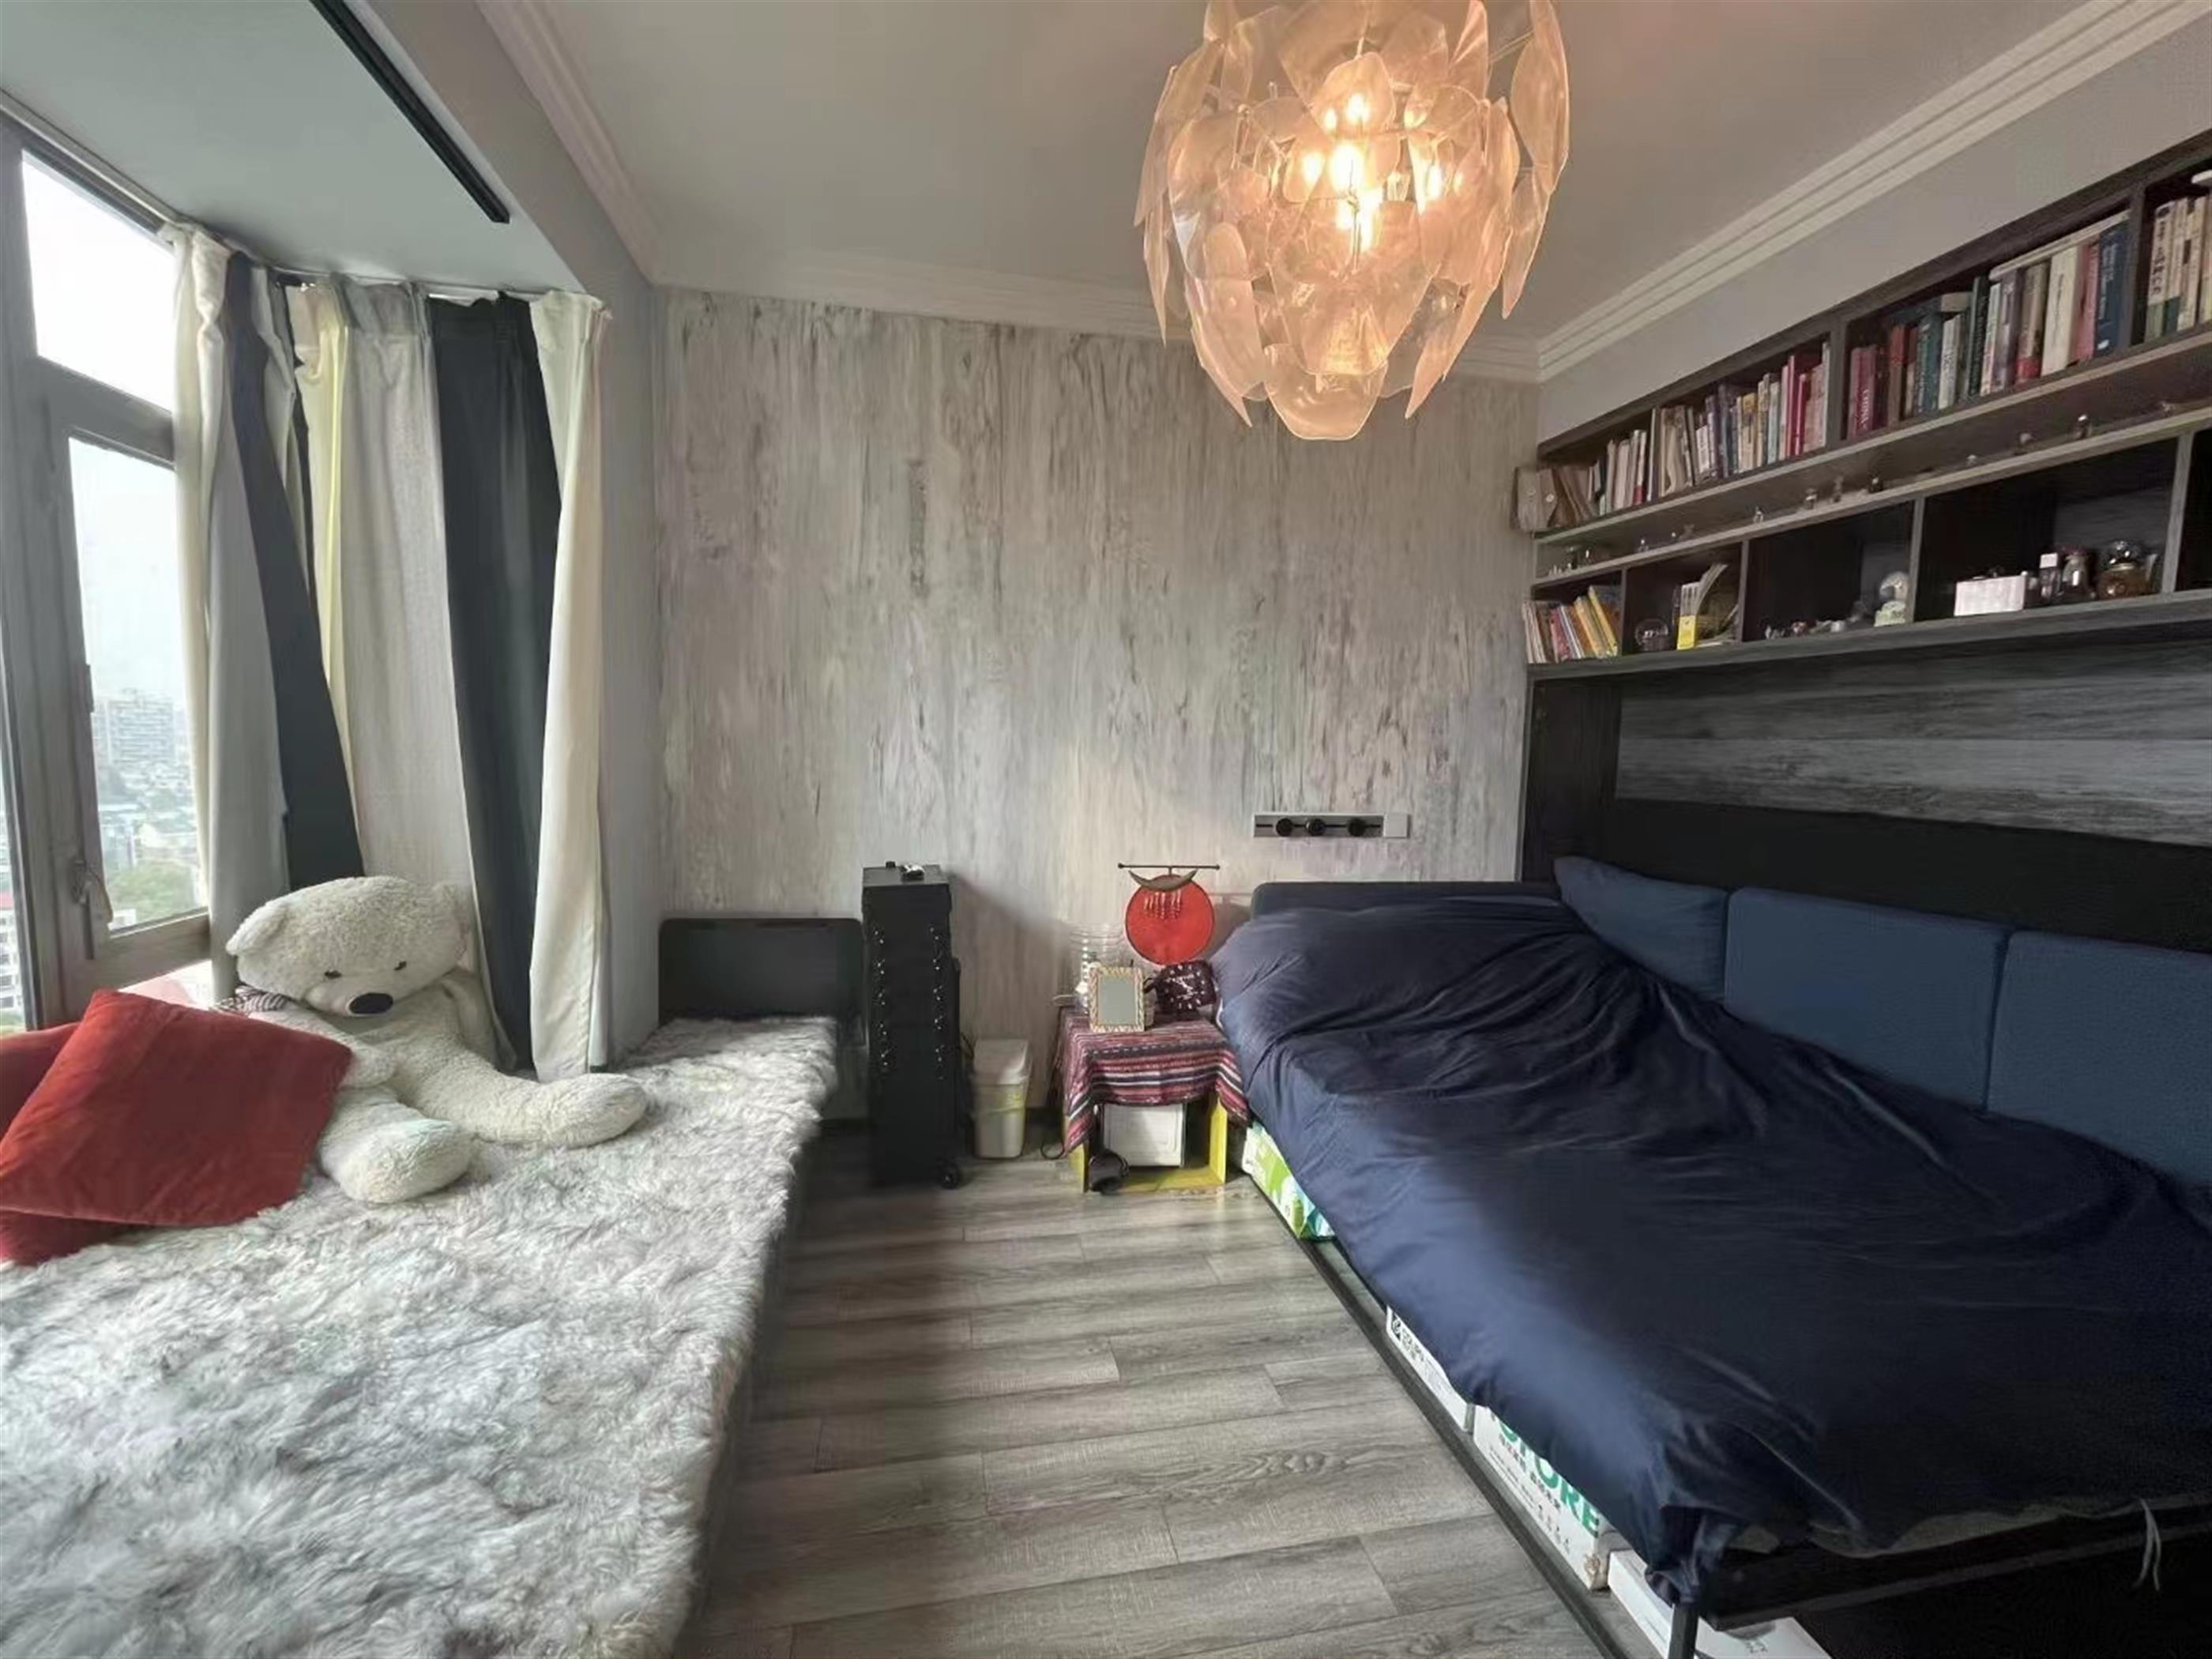 Spare Beedroom Classic Spacious Chic 3BR Apartment for Rent in Shanghai’s Jing’an Temple Neighborhood